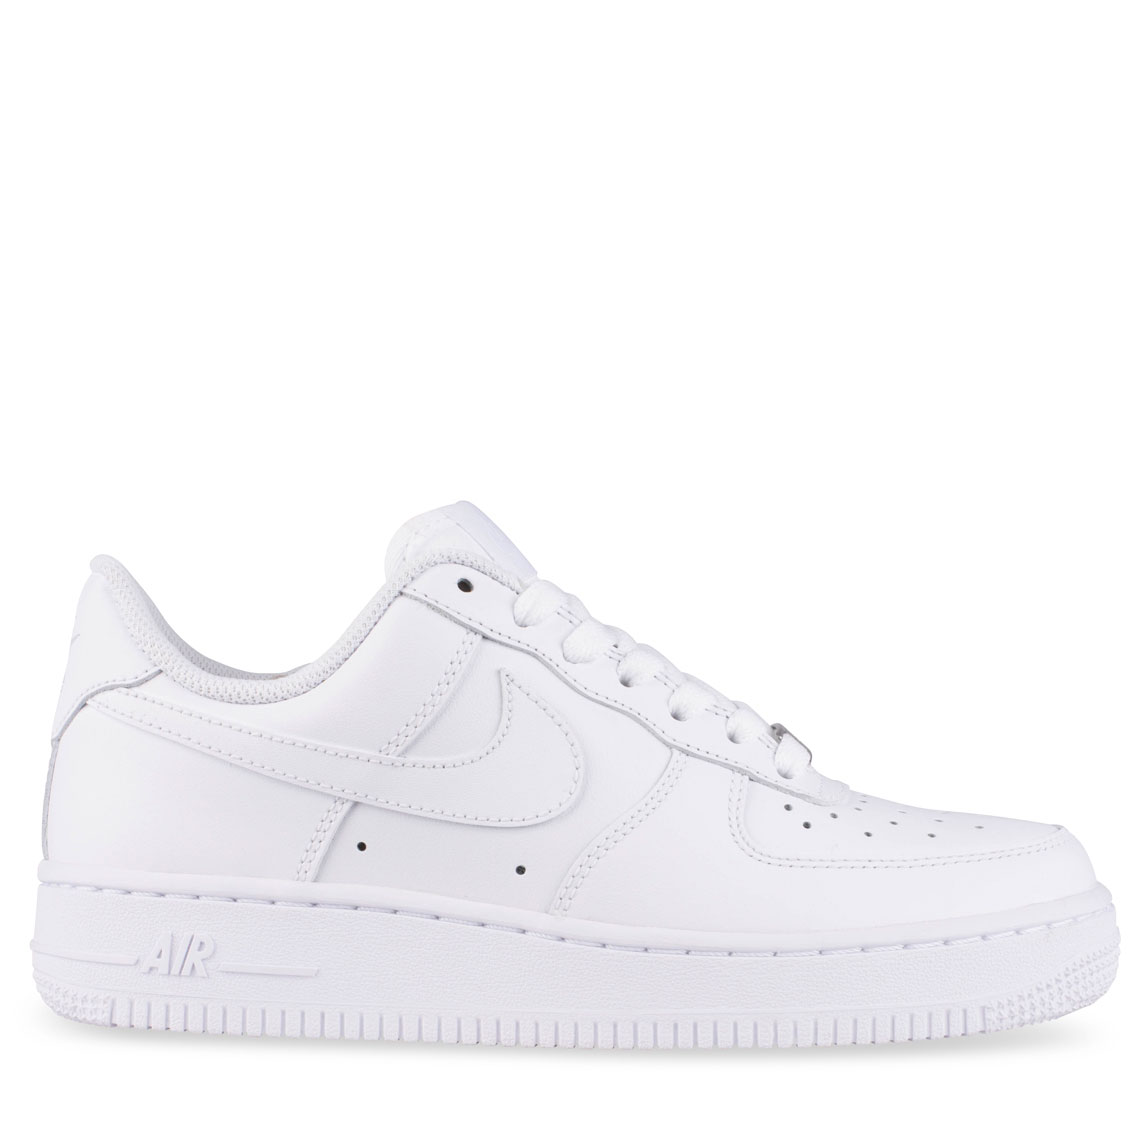 white air force ones low womens